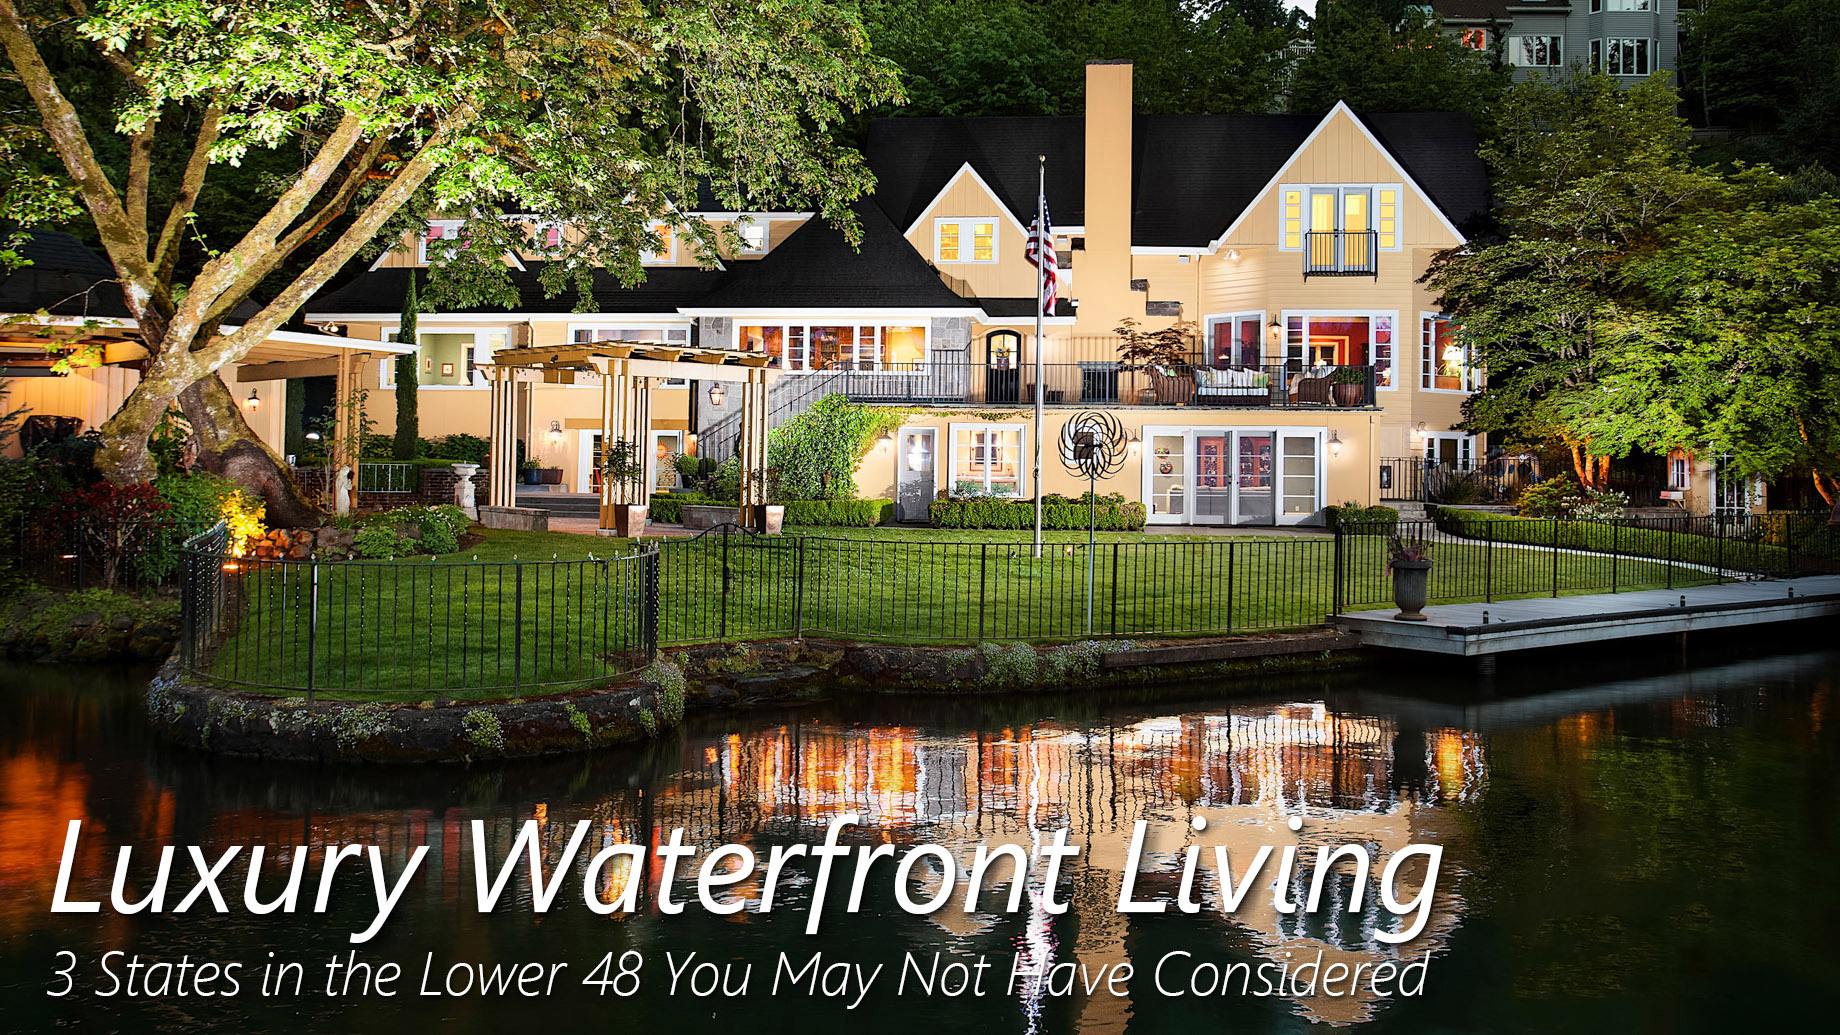 Luxury Waterfront Living – 3 States in the Lower 48 You May Not Have Considered